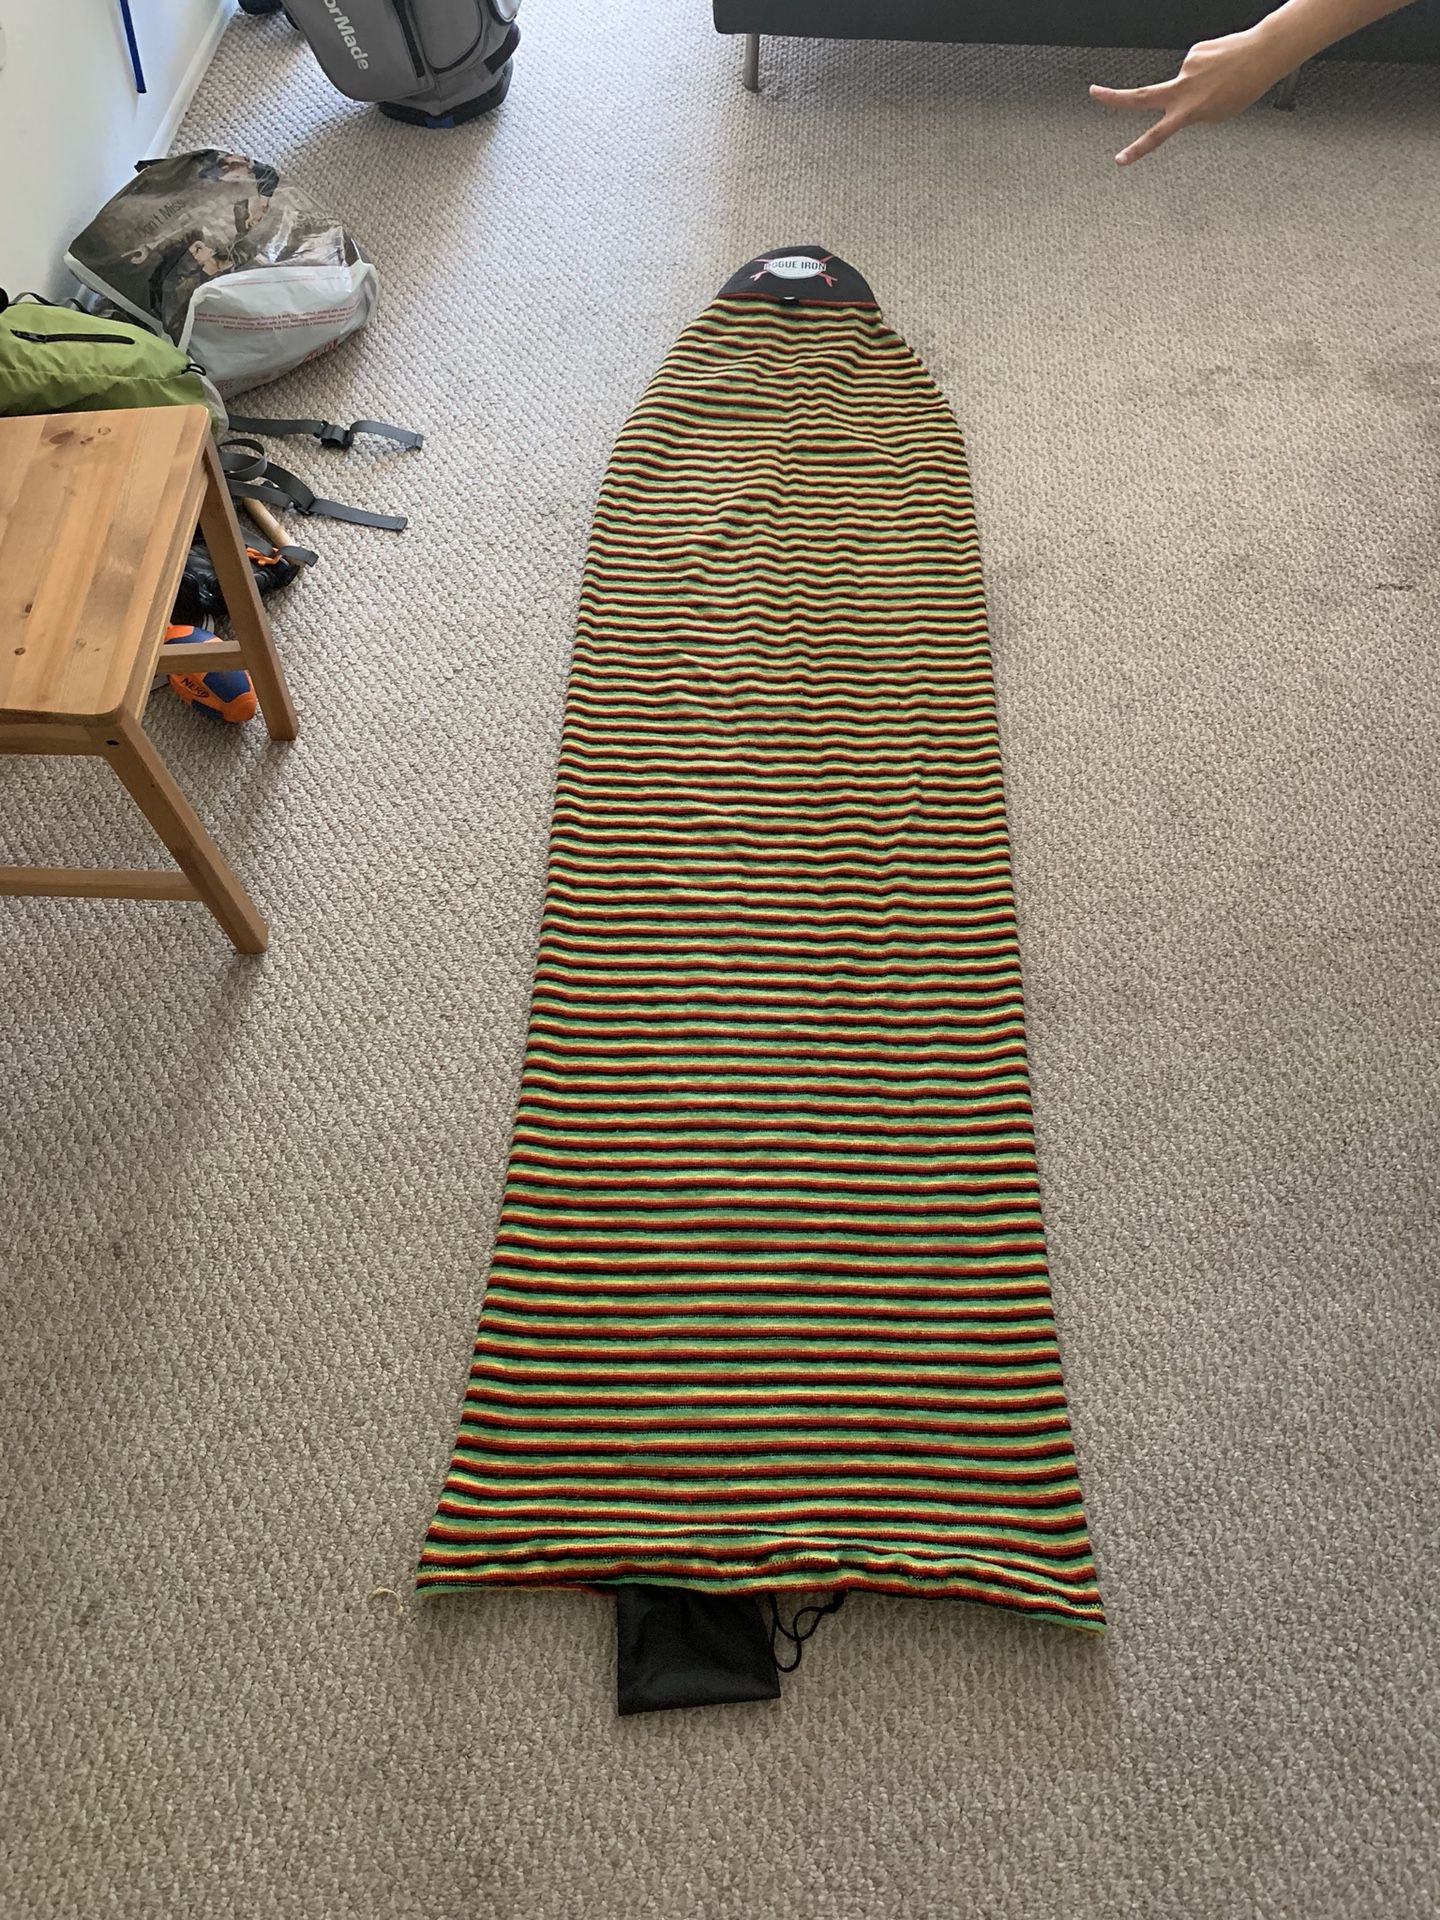 7 ft Surfboard Cover